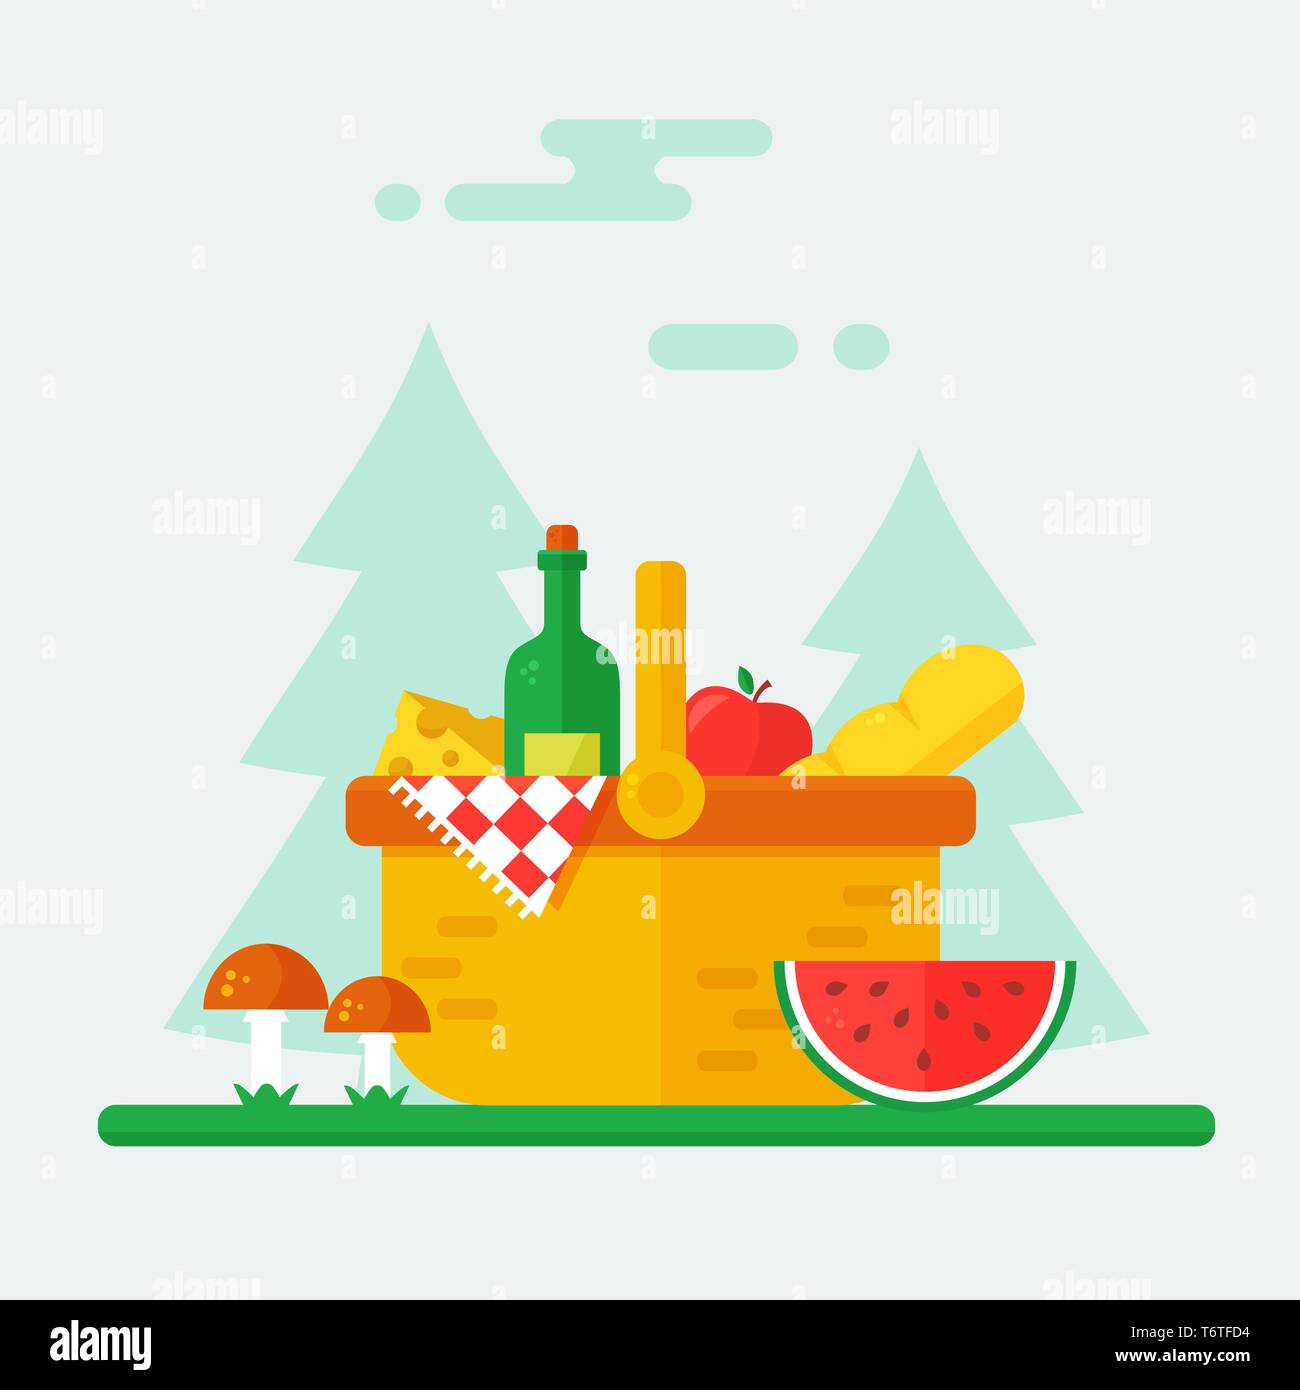 Summer picnic in nature vector banner. Basket full of food with wine, cheese, bread, apple, watermelon and checkered blanket. Modern flat illustration Stock Vector